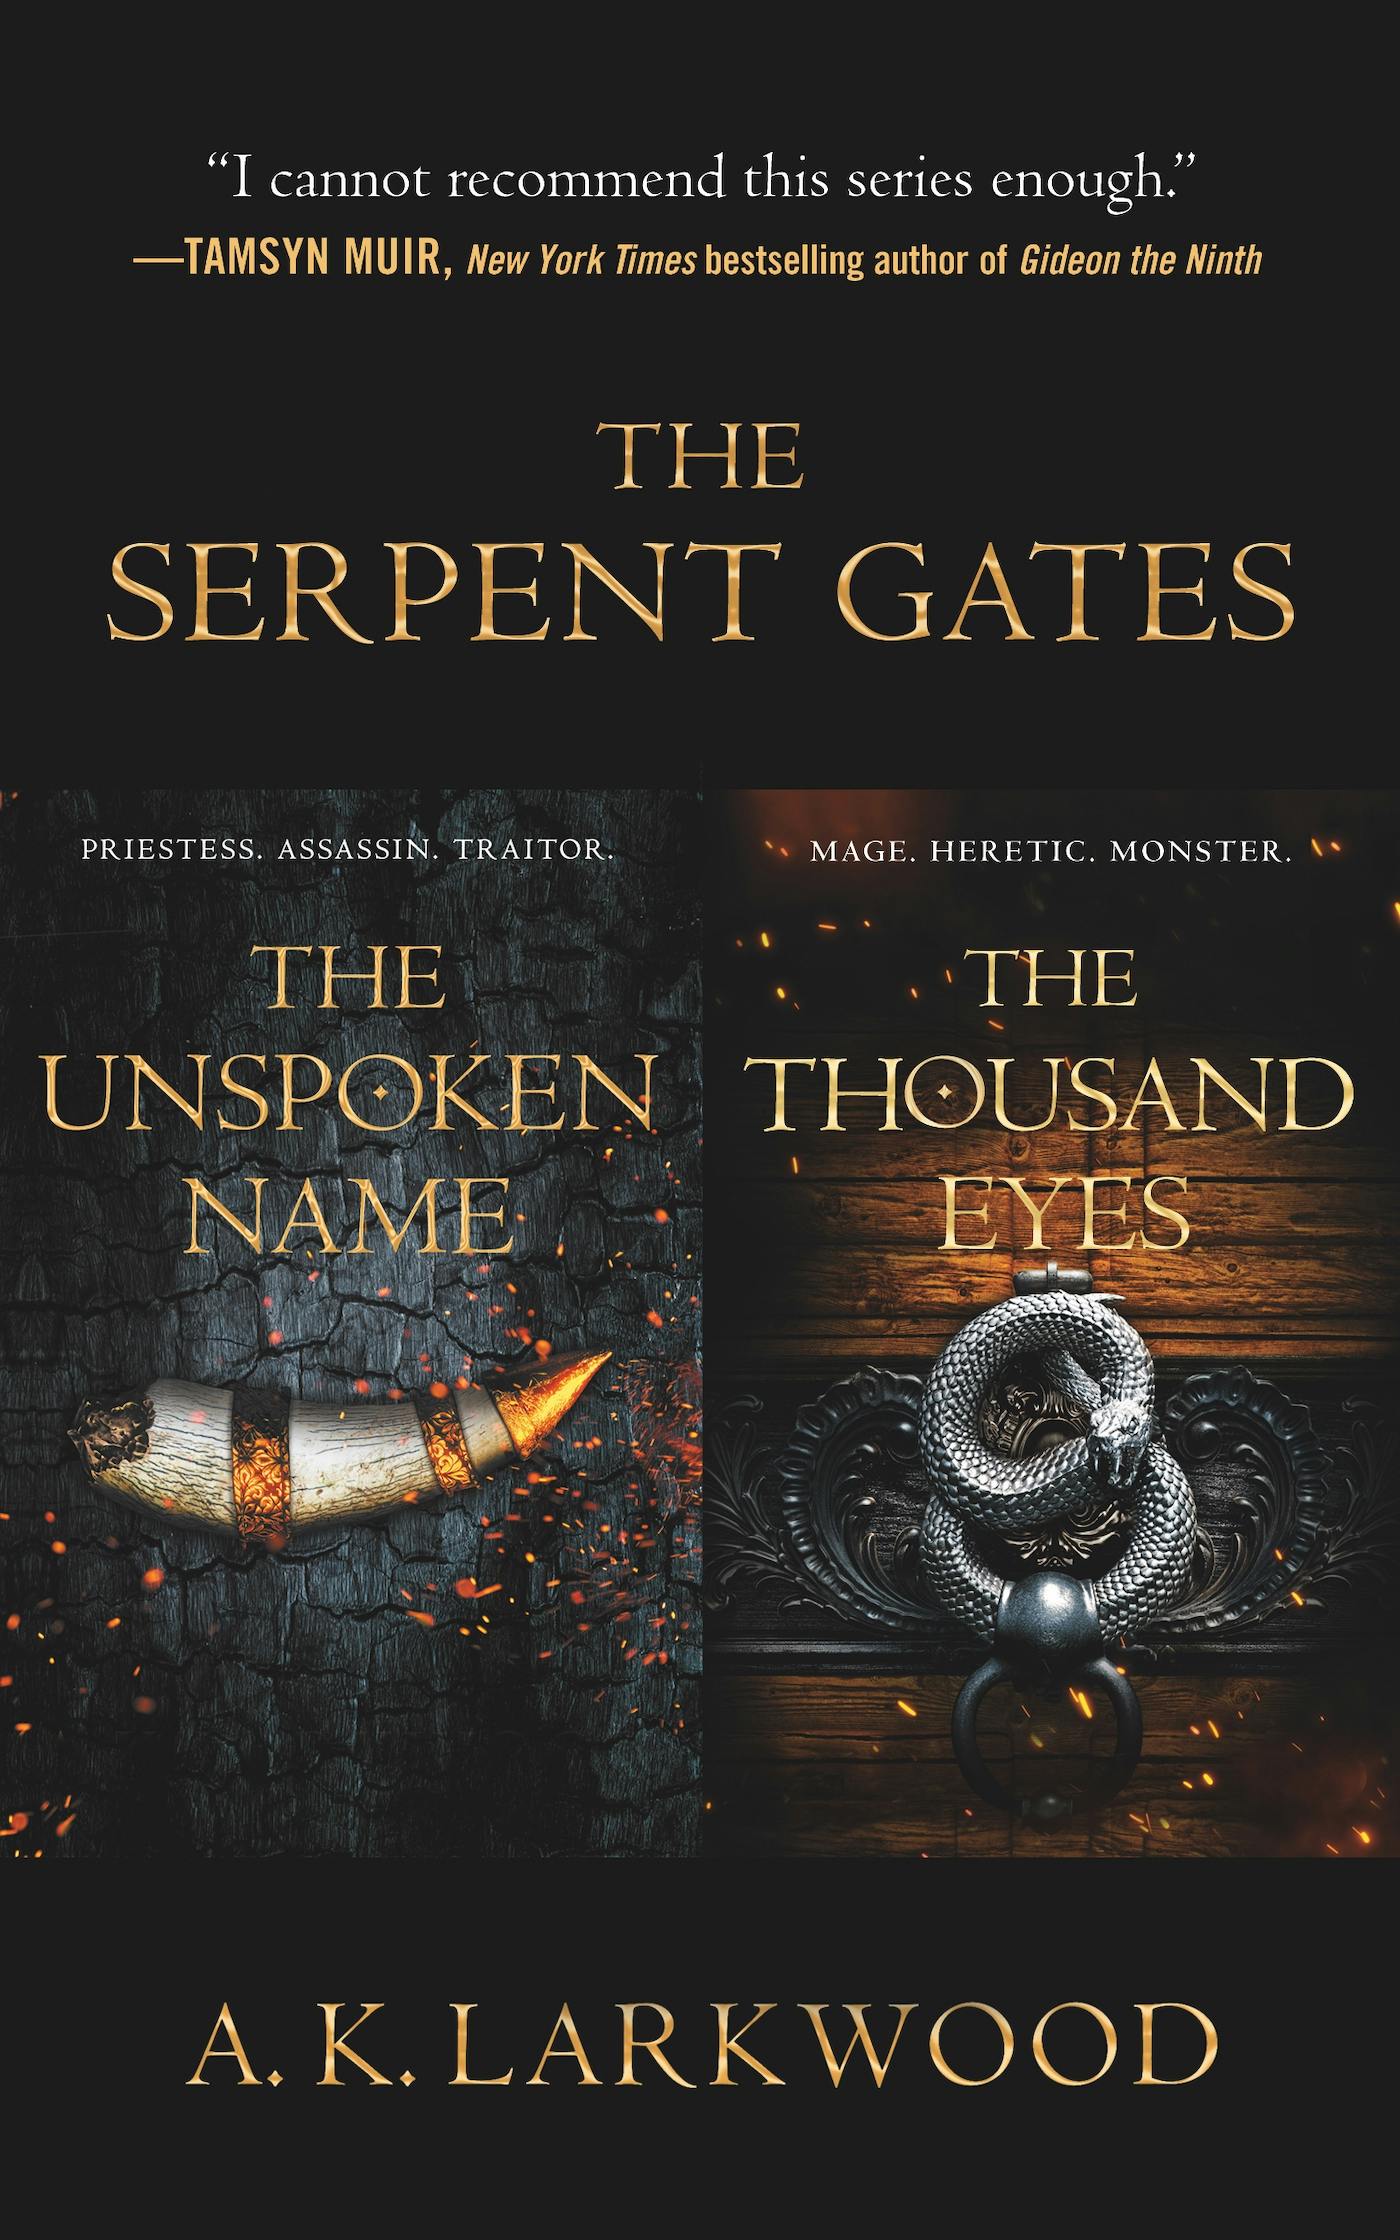 Cover for the book titled as: The Serpent Gates